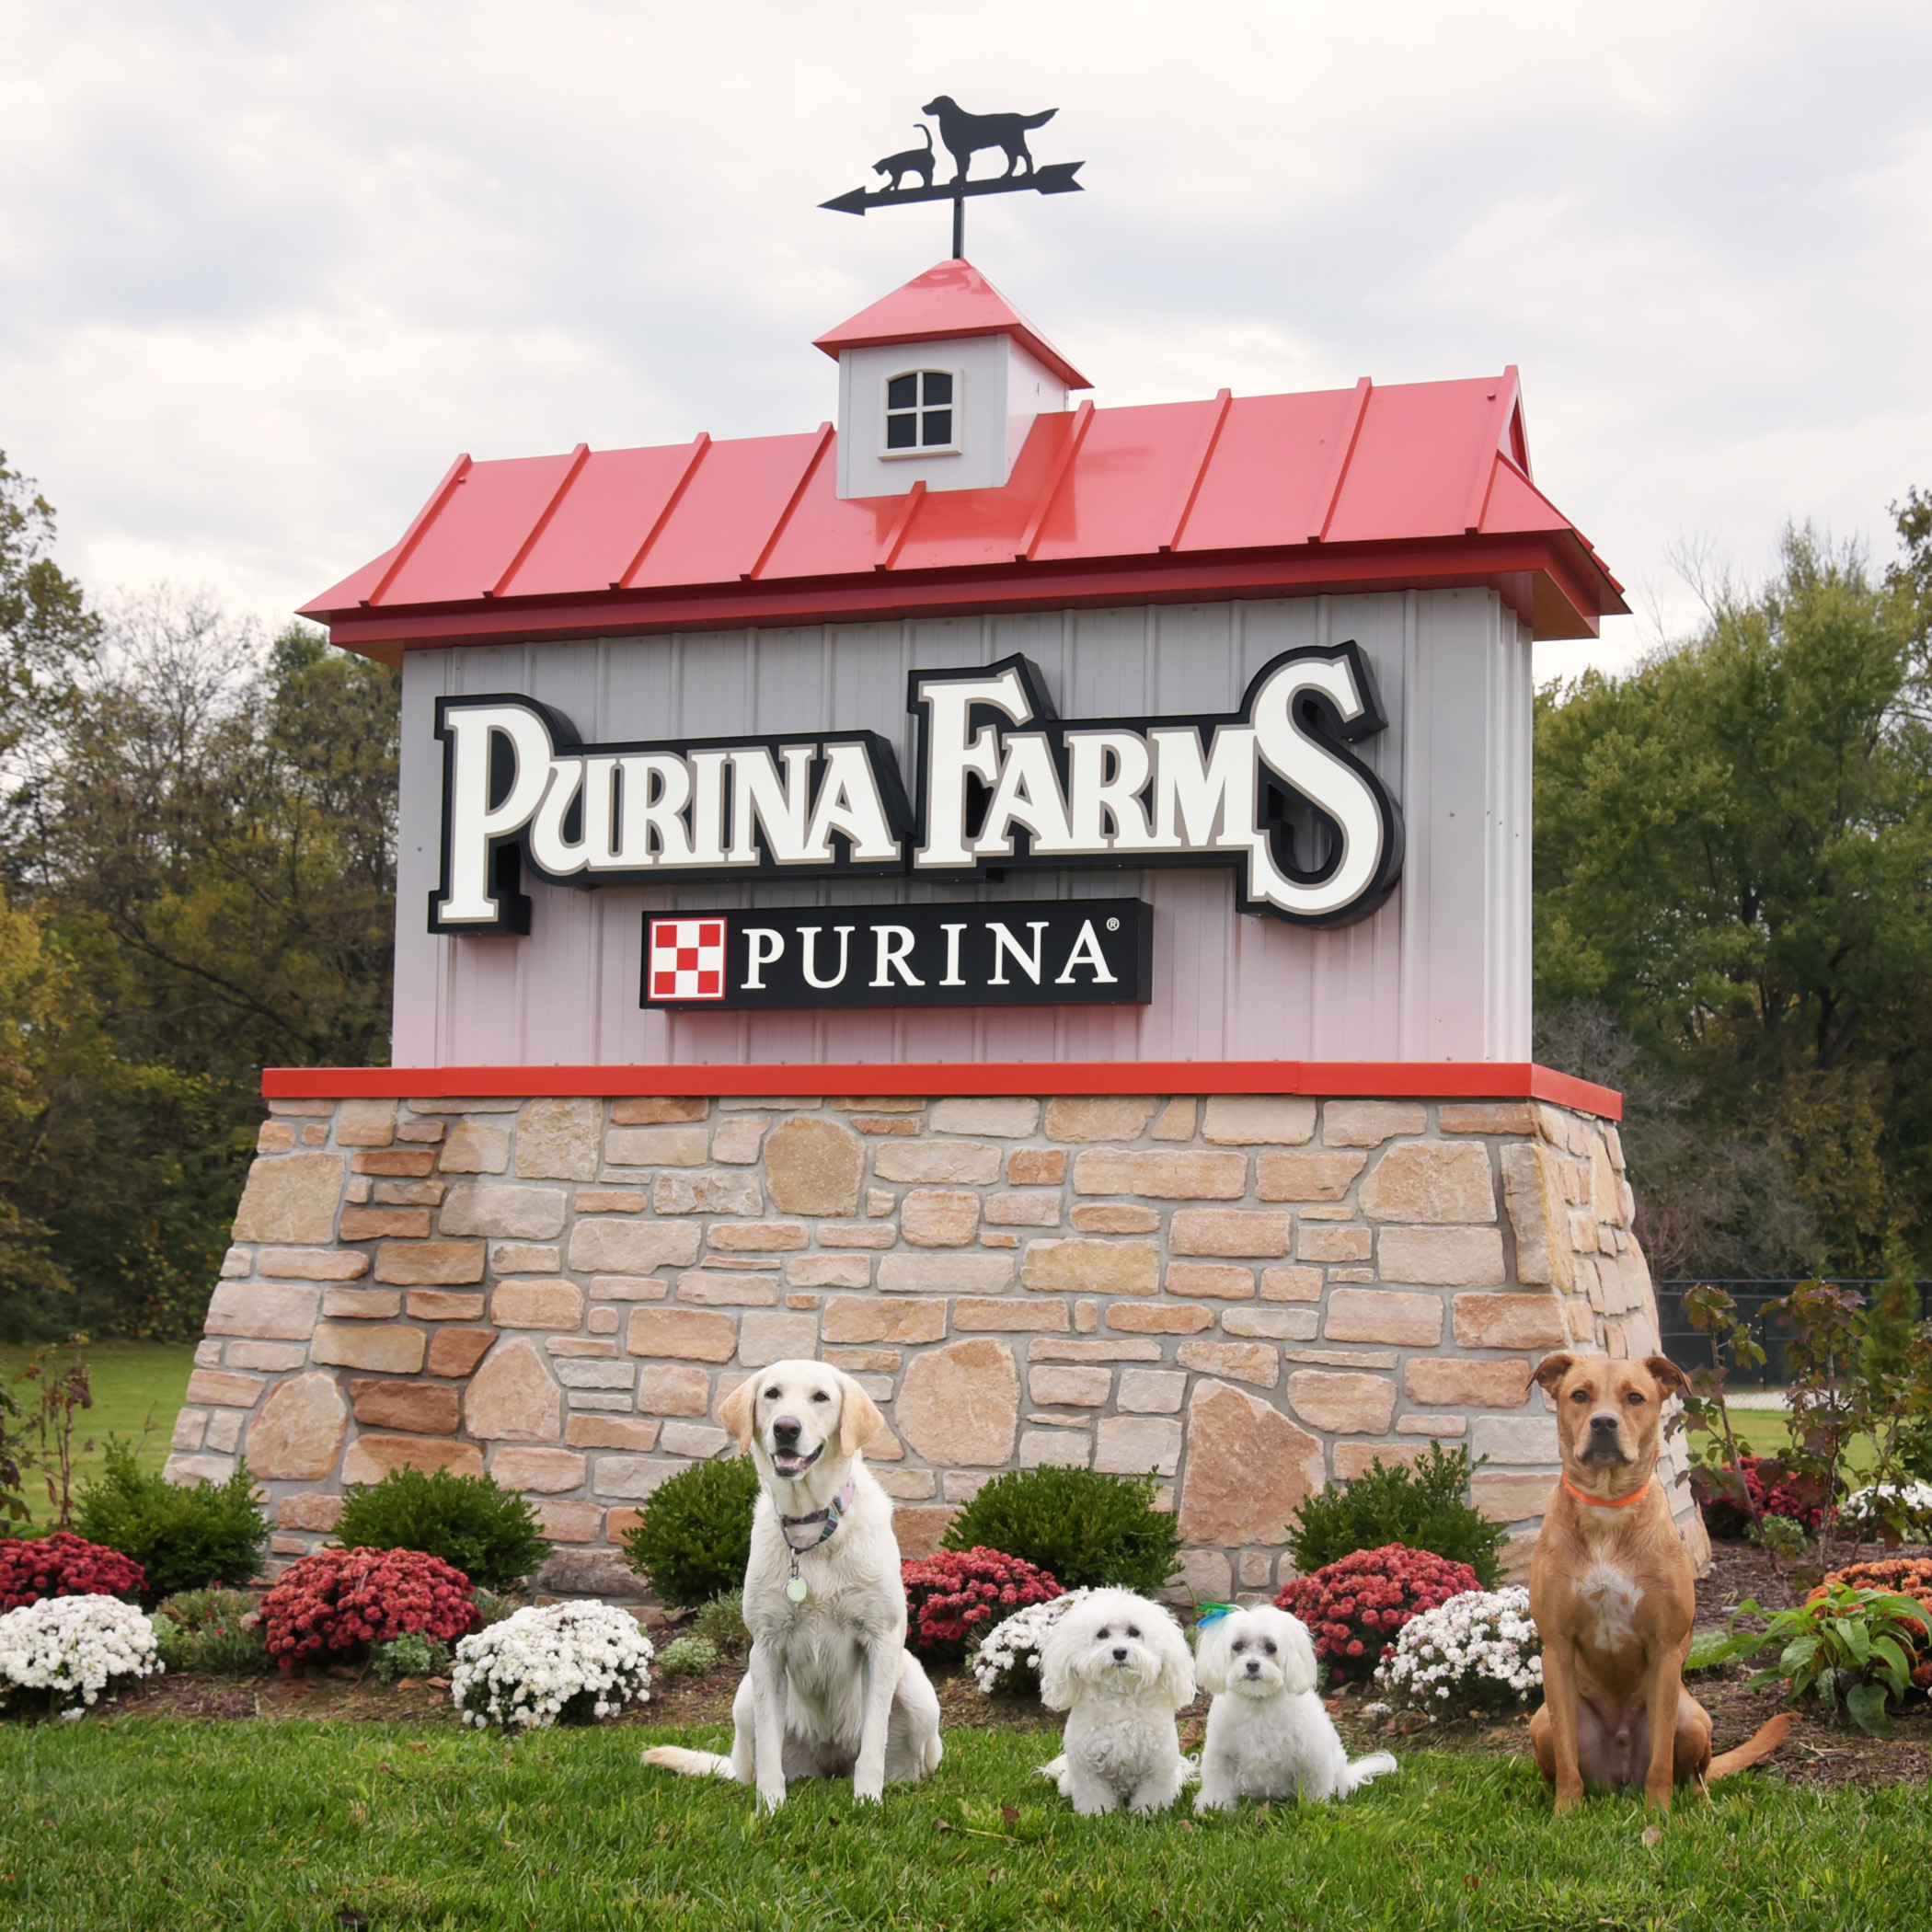  We survived 22 1/2 hours in the car, crossed five states, experienced temps from the 90s to the 40s, but the most important part…we made it to PurinaFarms, safe and sound! Now we’re off to rest. We all have a big day of jumping and cheering ahead of